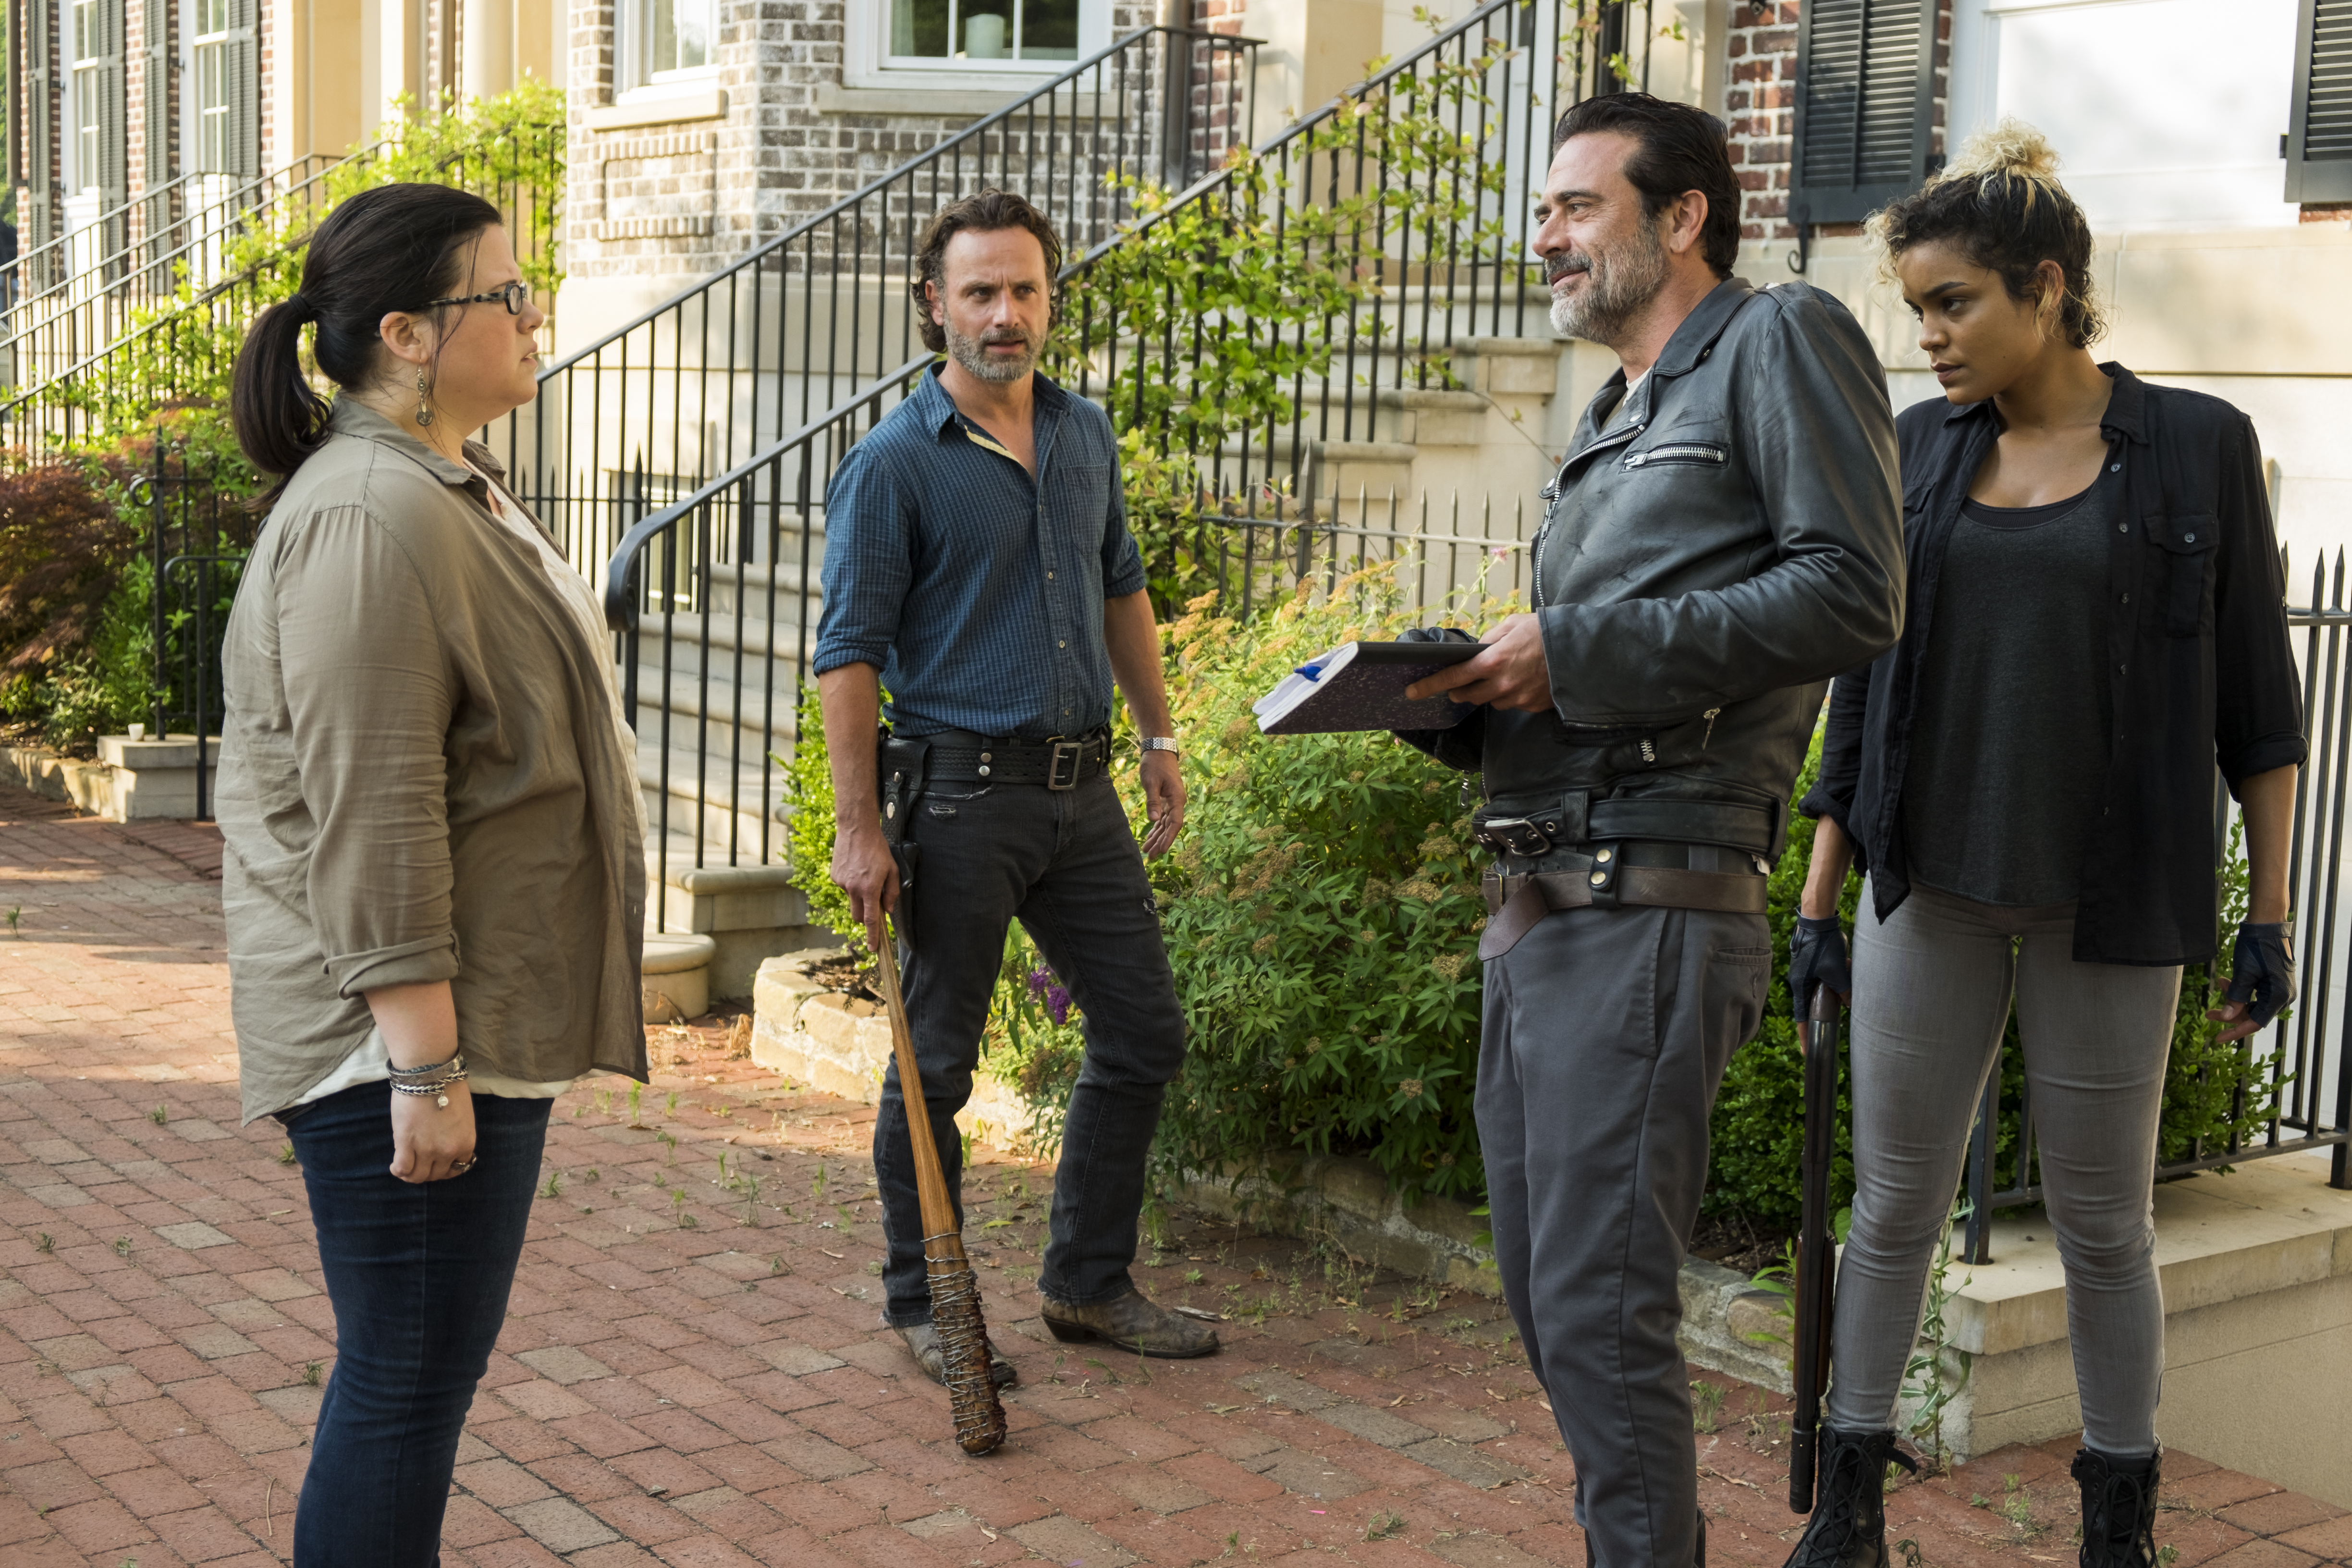 Which two guns were missing when Negan arrived?